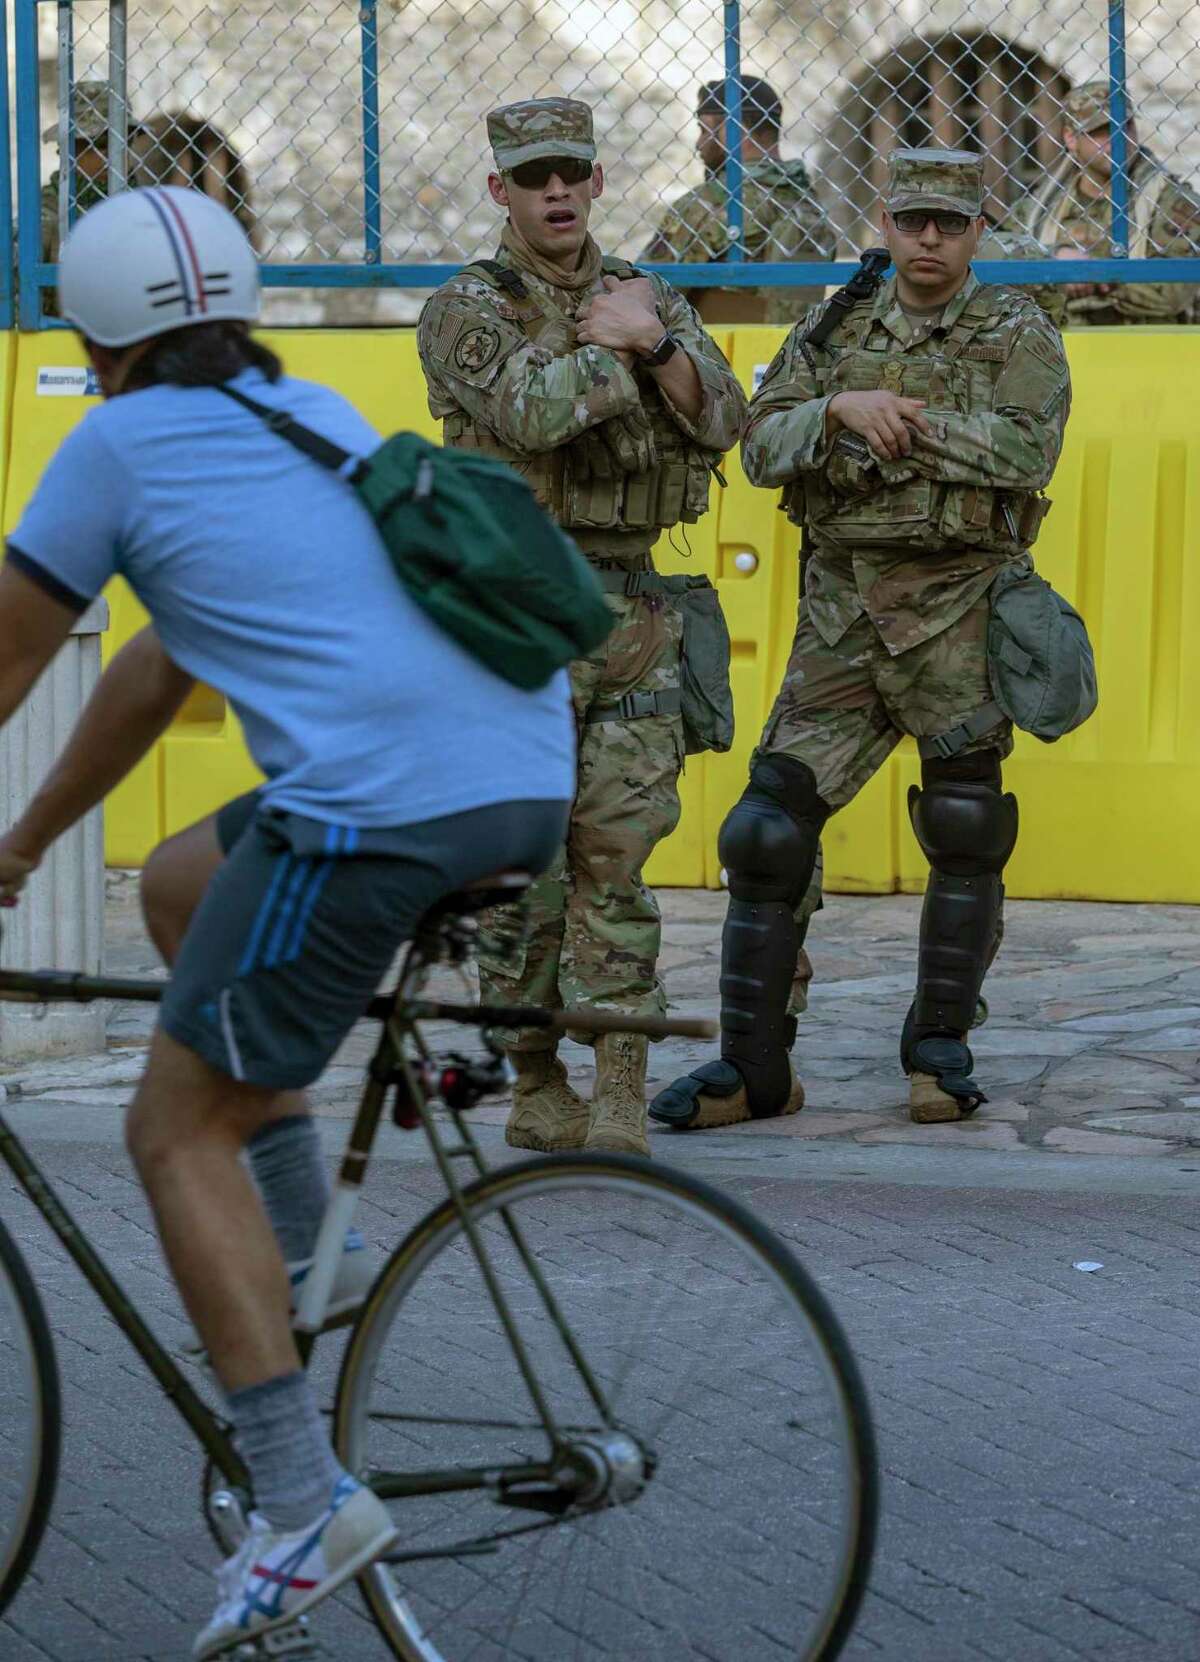 Texas Air National Guard airmen watch a bicyclist ride past the Alamo on June 3 . The guardsmen were part of a heavy military and police presence there to keep ongoing protests over racial justice issues out of Alamo Plaza.